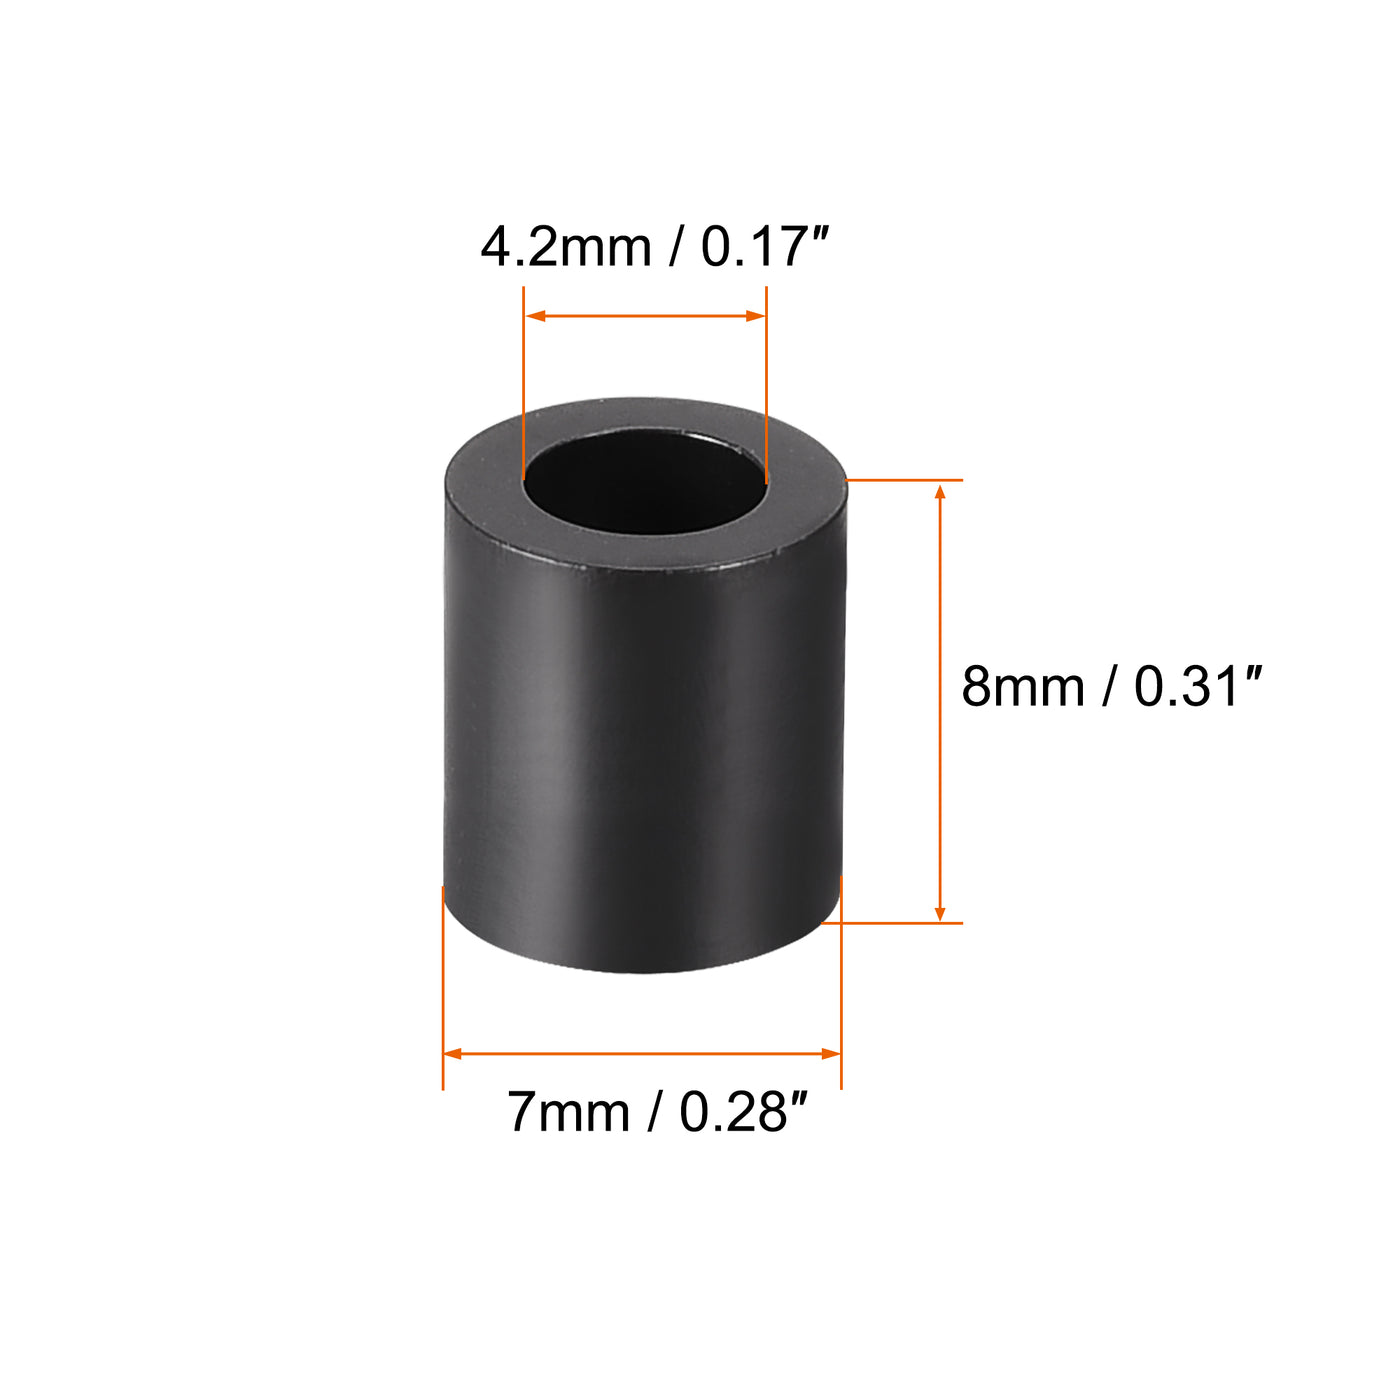 uxcell Uxcell Nylon Round Spacer Washer 4.2mmx7mmx8mm for M4 Screws Black 300Pcs